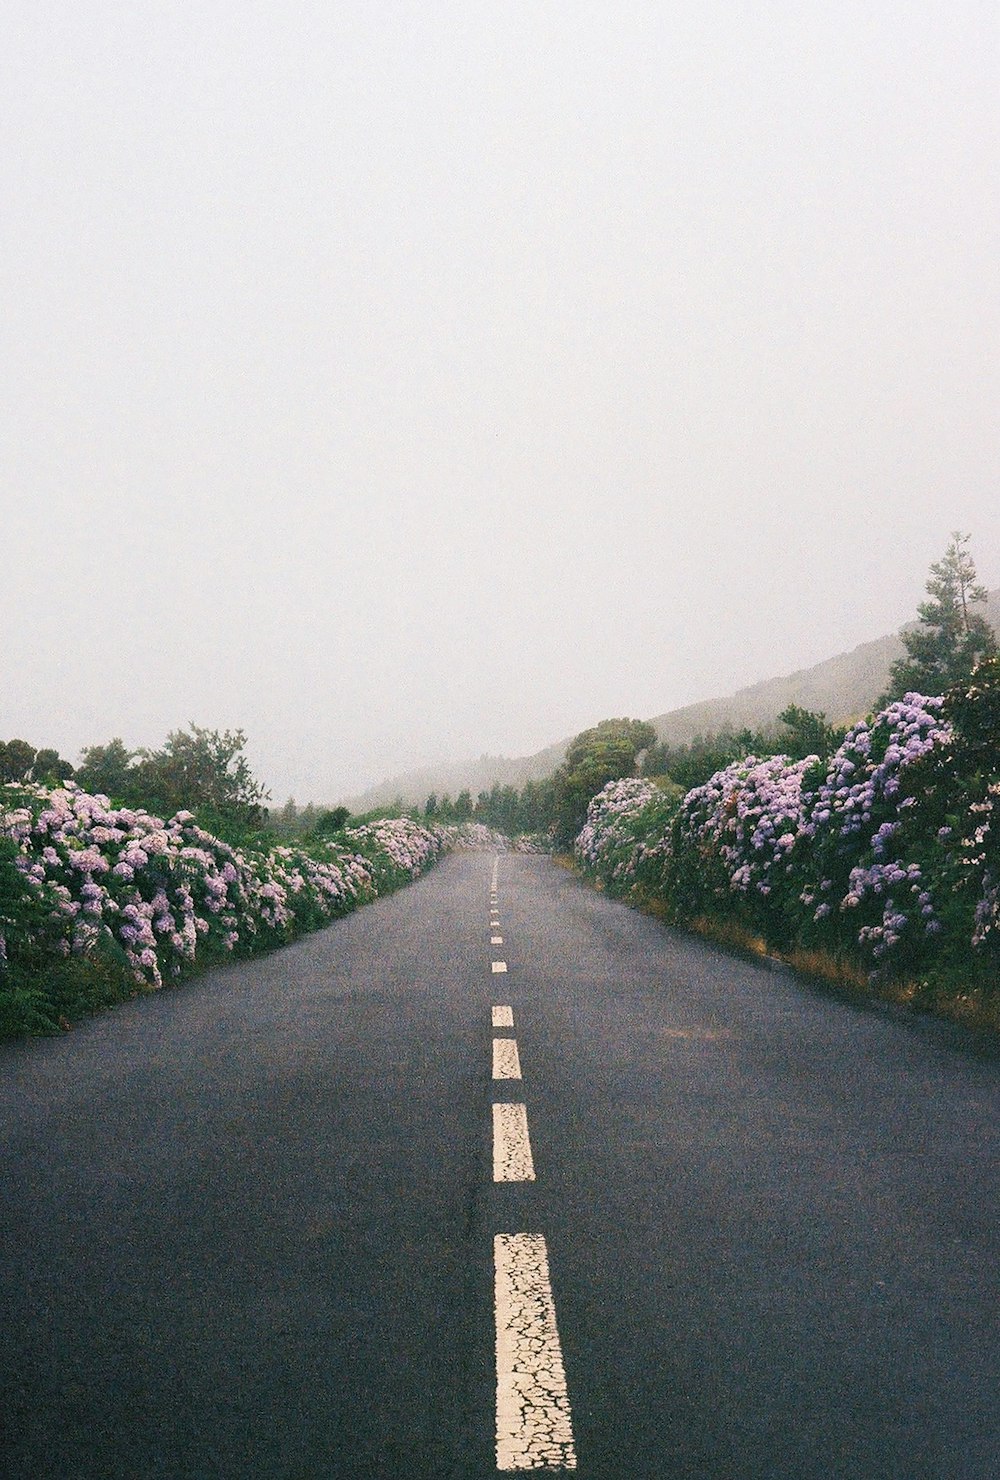 a long road with flowers on both sides of it